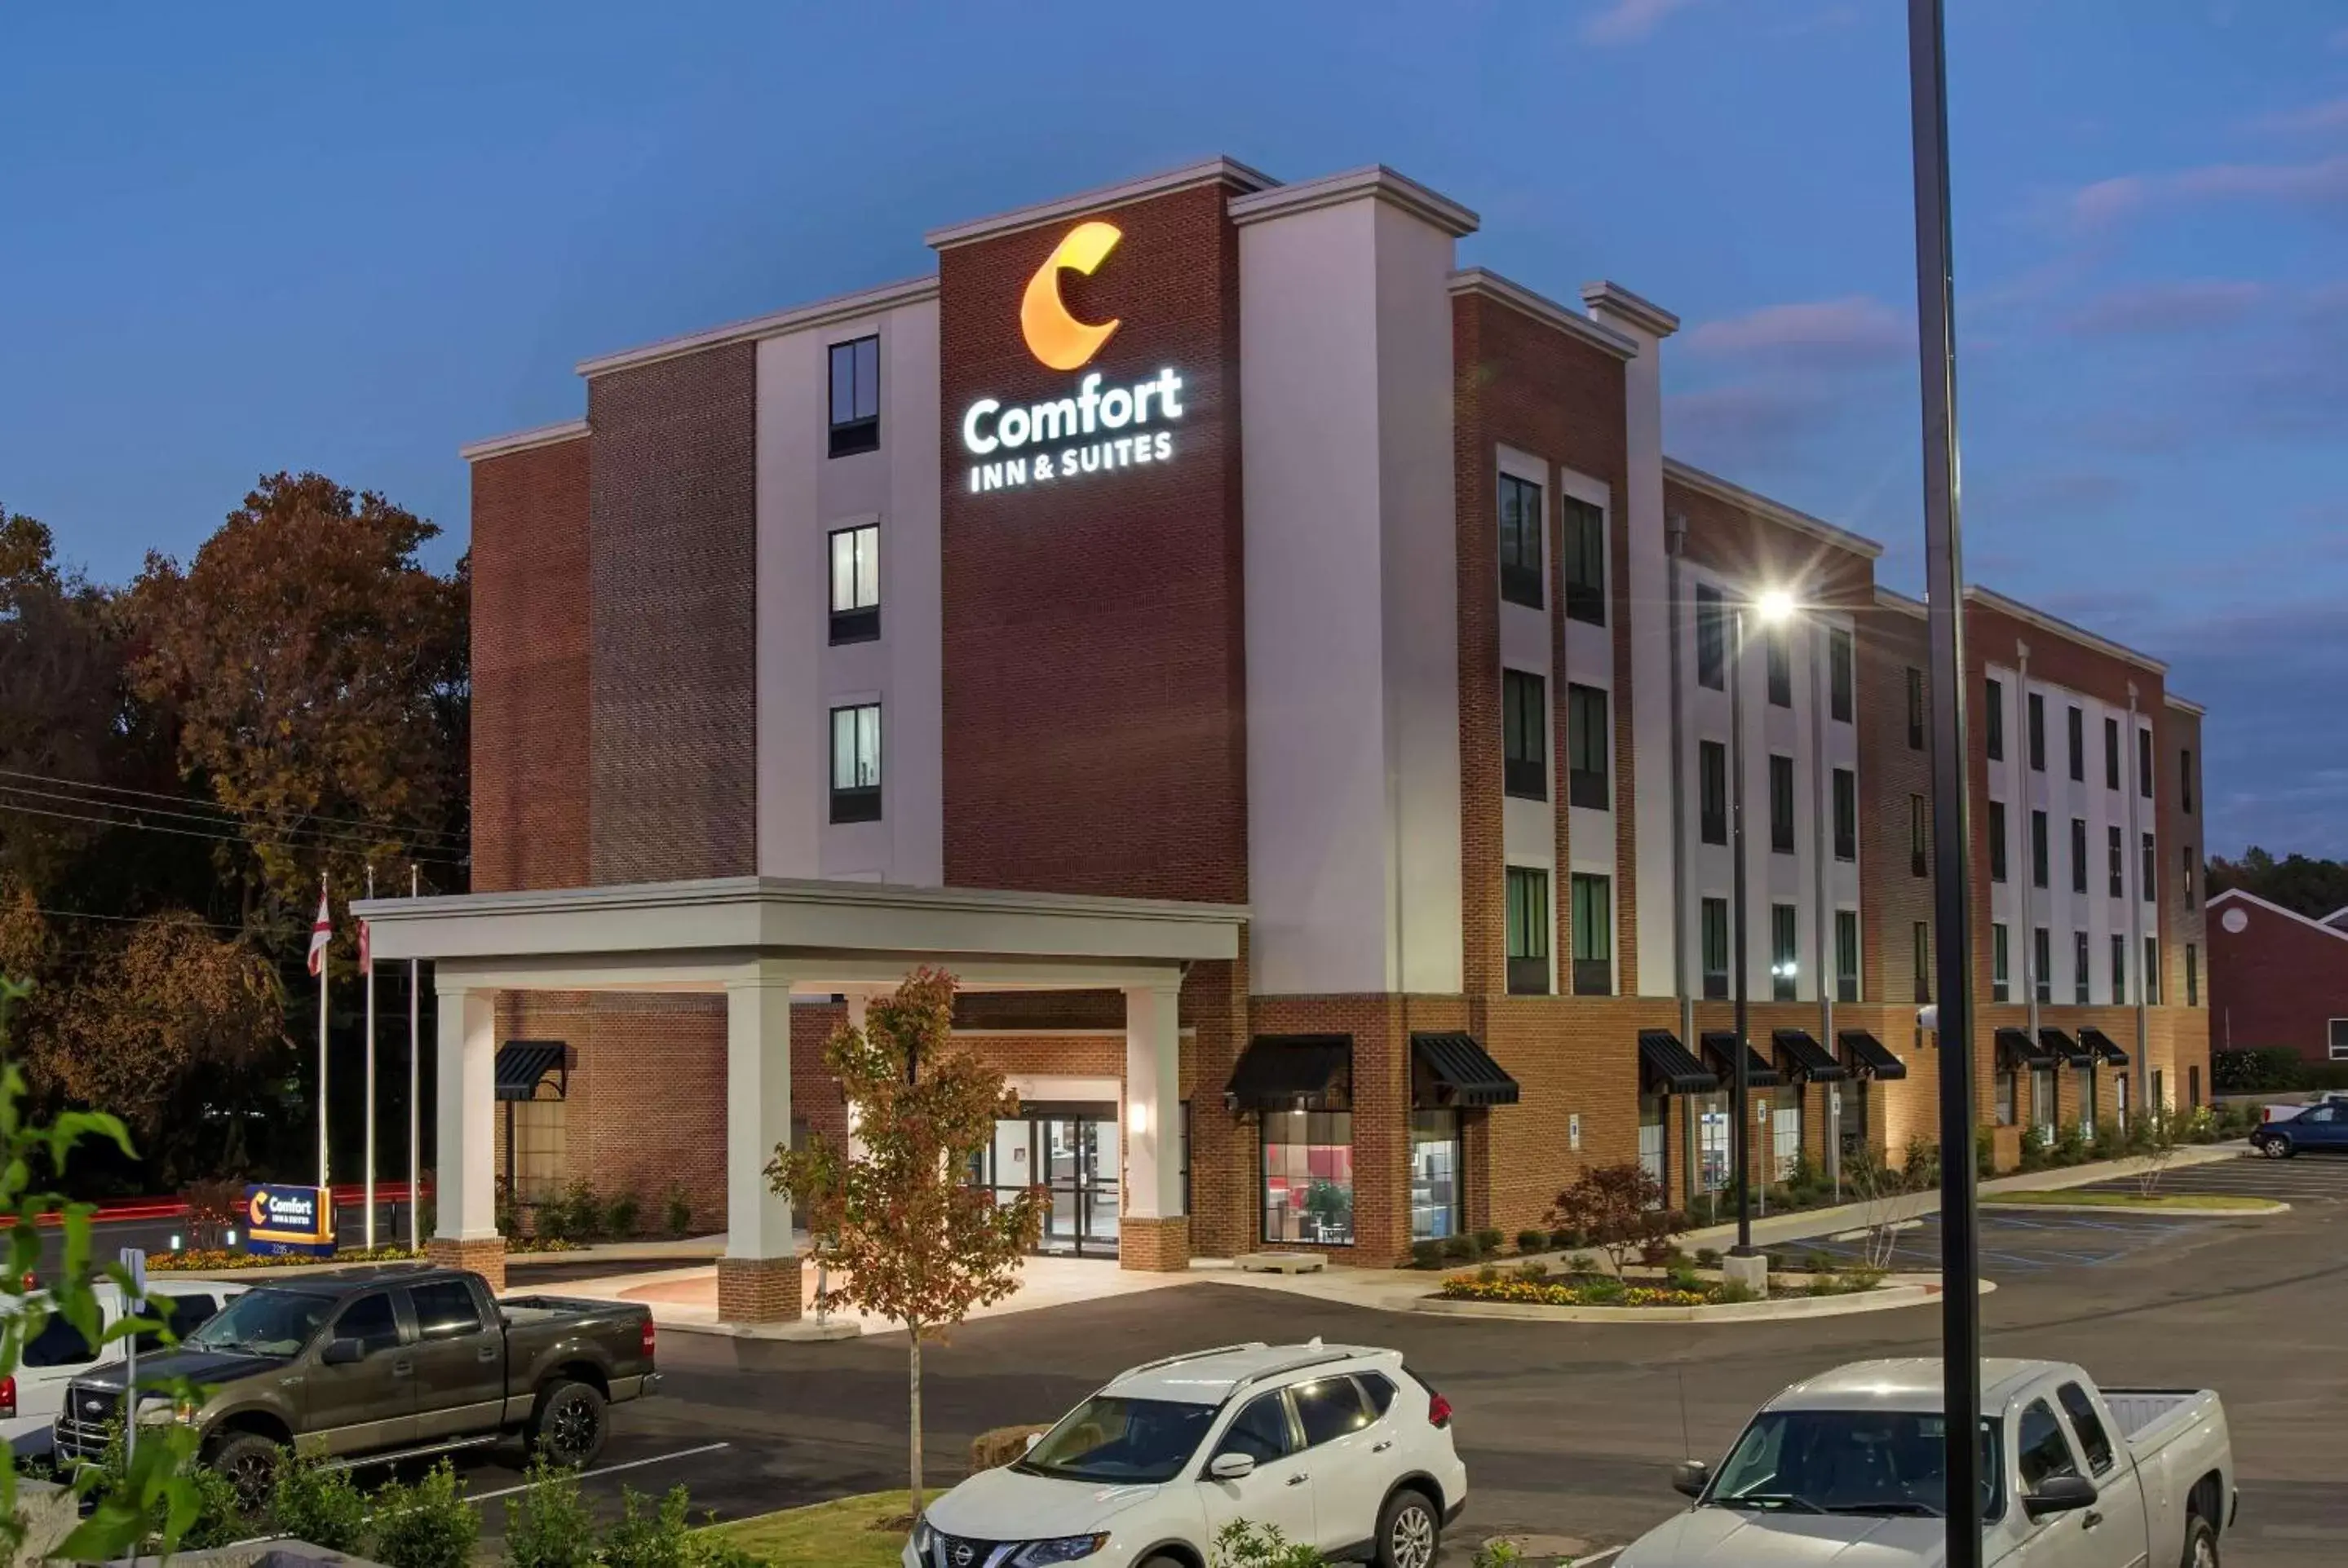 Property building in Comfort Inn & Suites Downtown near University